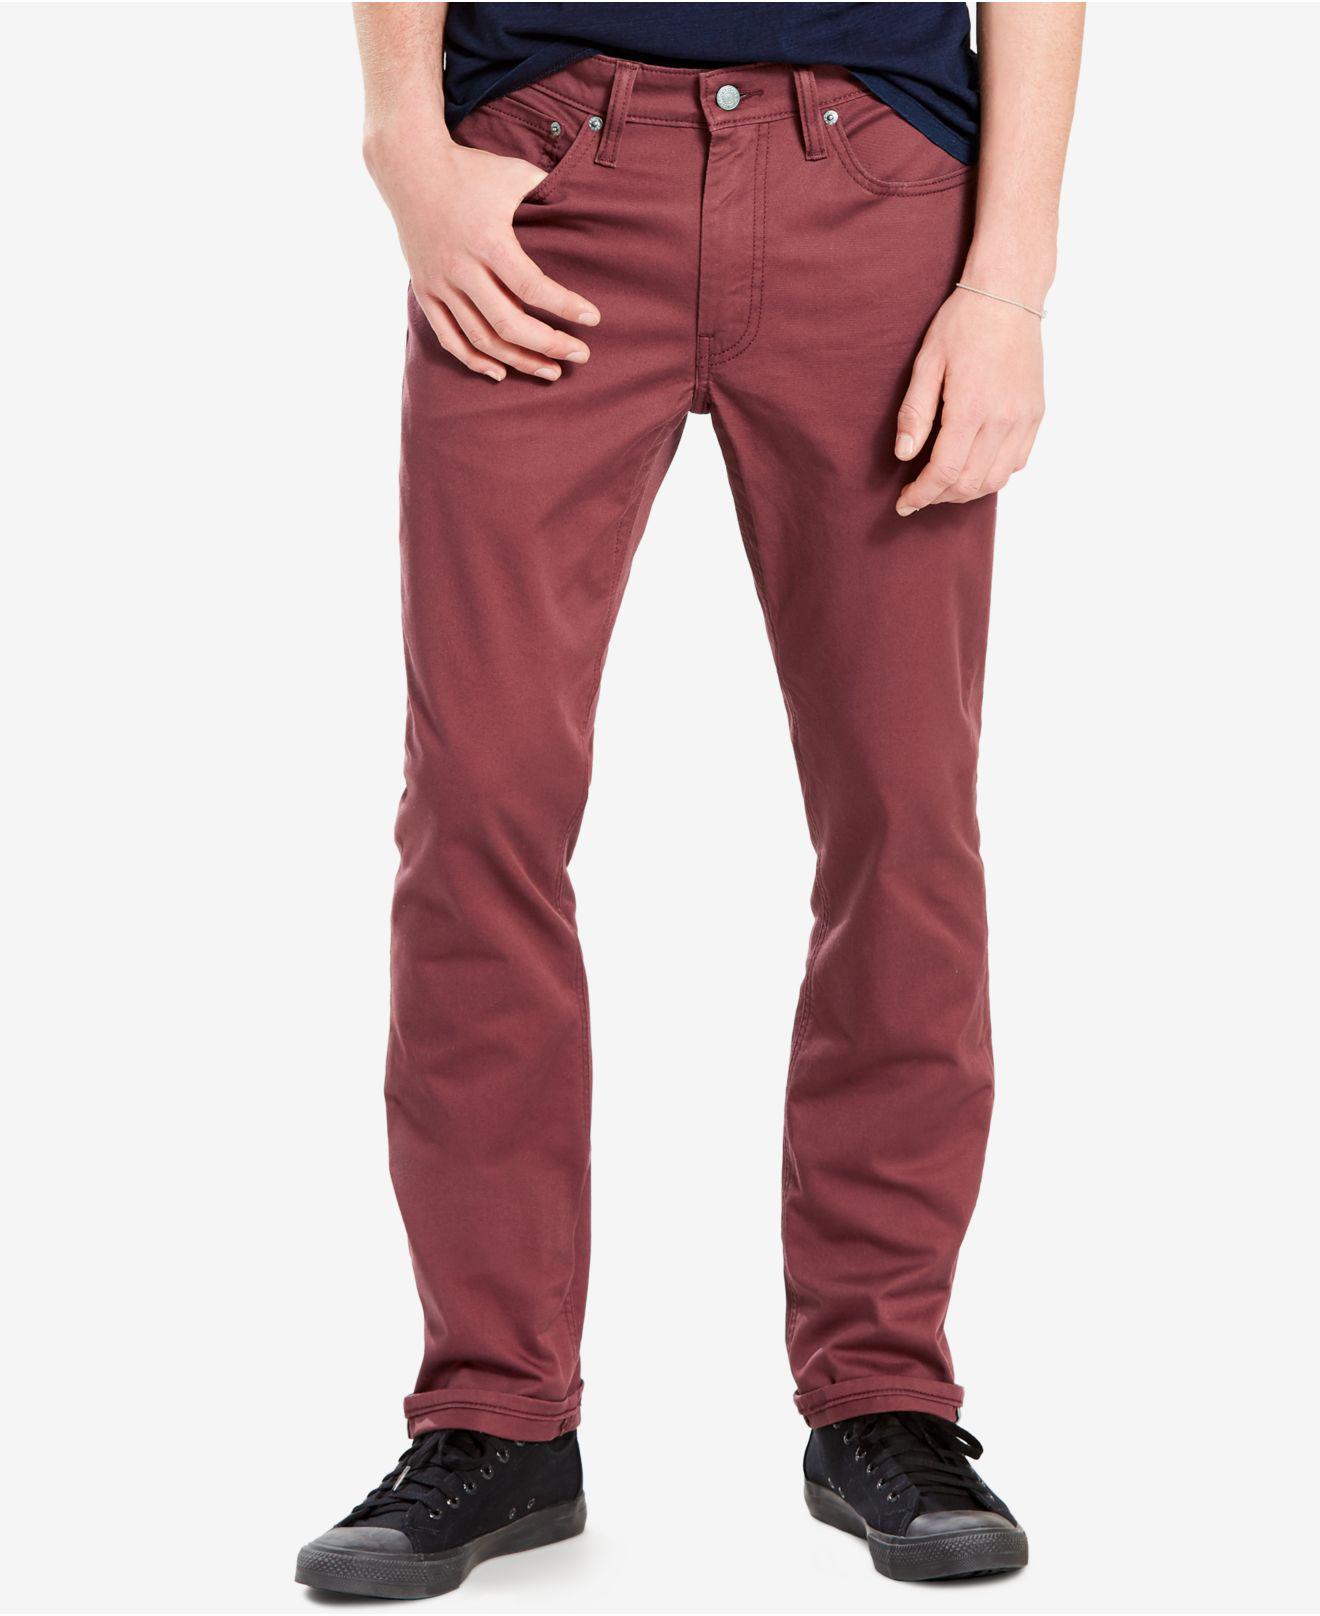 Lyst - Levi'S 511 Slim-fit Commuter Jeans in Red for Men